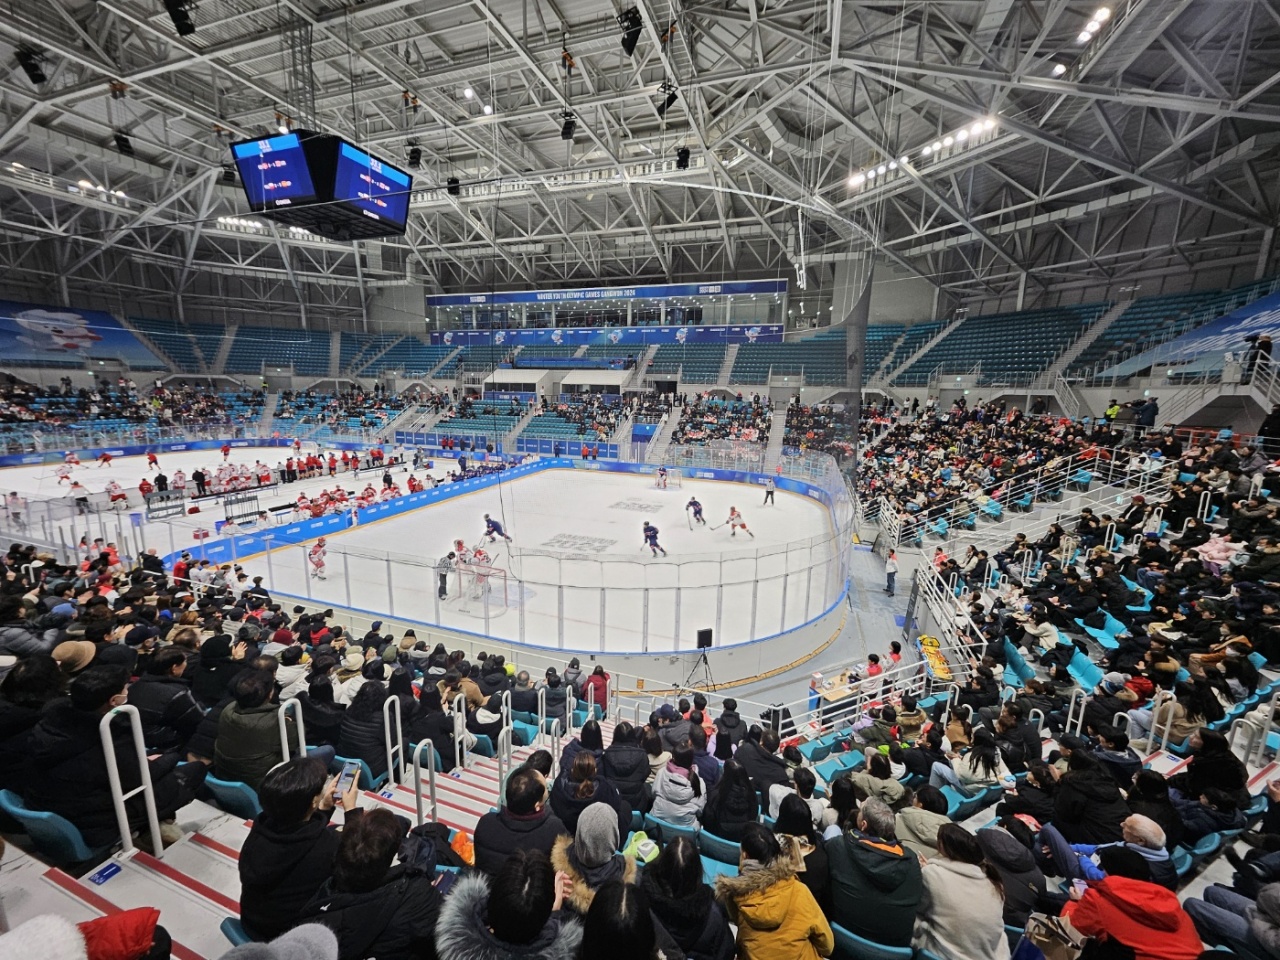 Spectators watch an ice hockey game at the Gangneung Hockey Center in Gangwon Province. (PyeongChang 2018 Legacy Foundation)